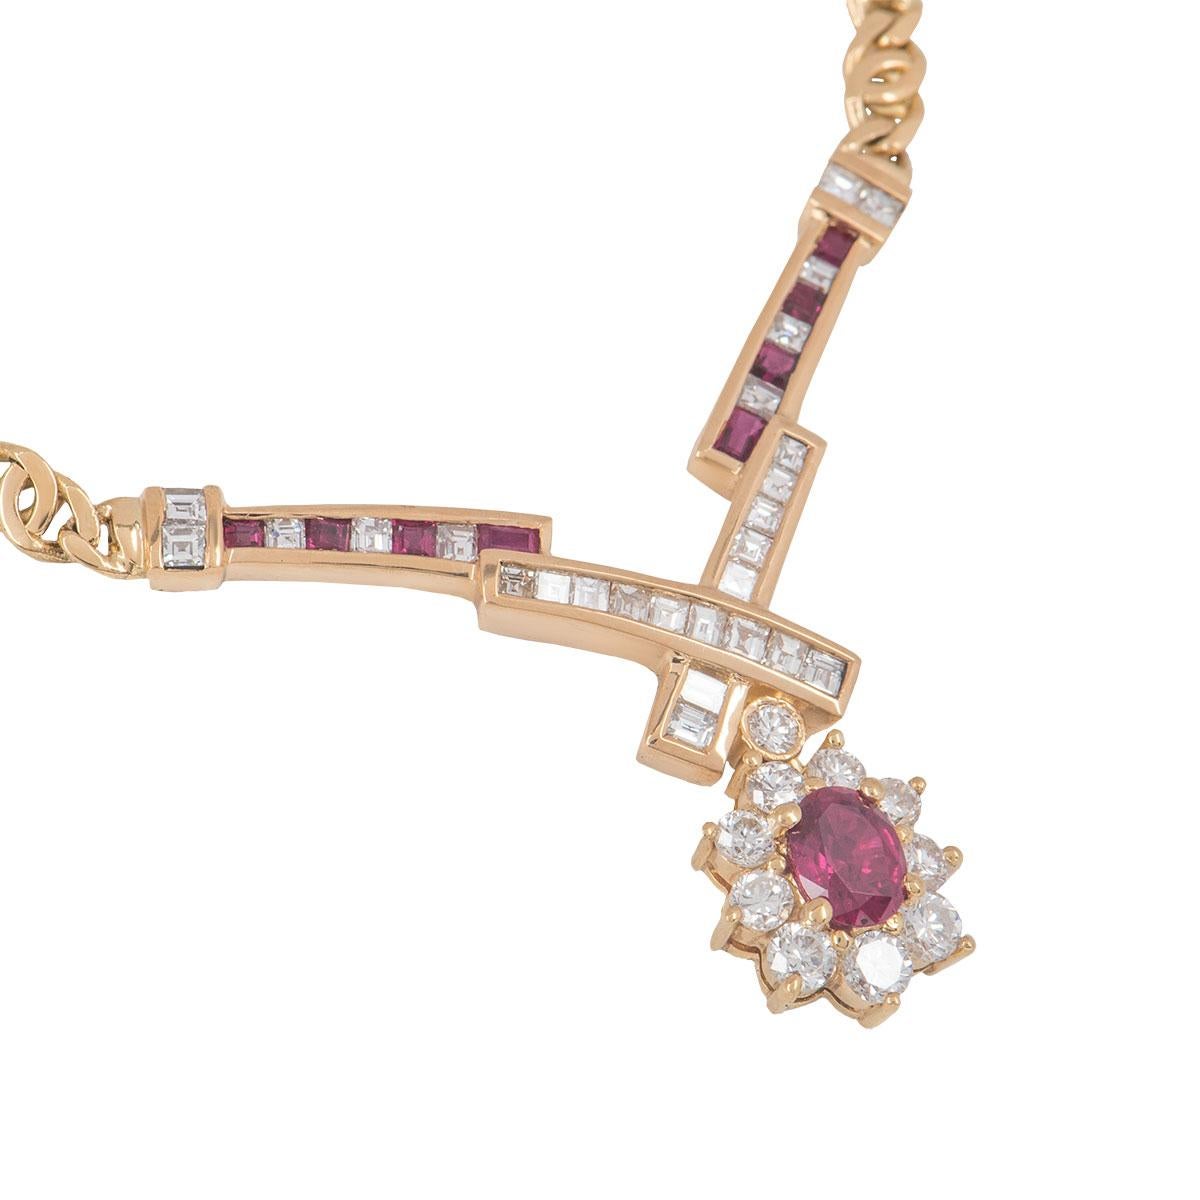 An 18k yellow gold diamond and ruby necklace. The necklace features a diamond set cross with elongated arms with alternating square emerald cut rubies and diamonds. There is a single round brilliant cut diamond in a rubover setting suspending a